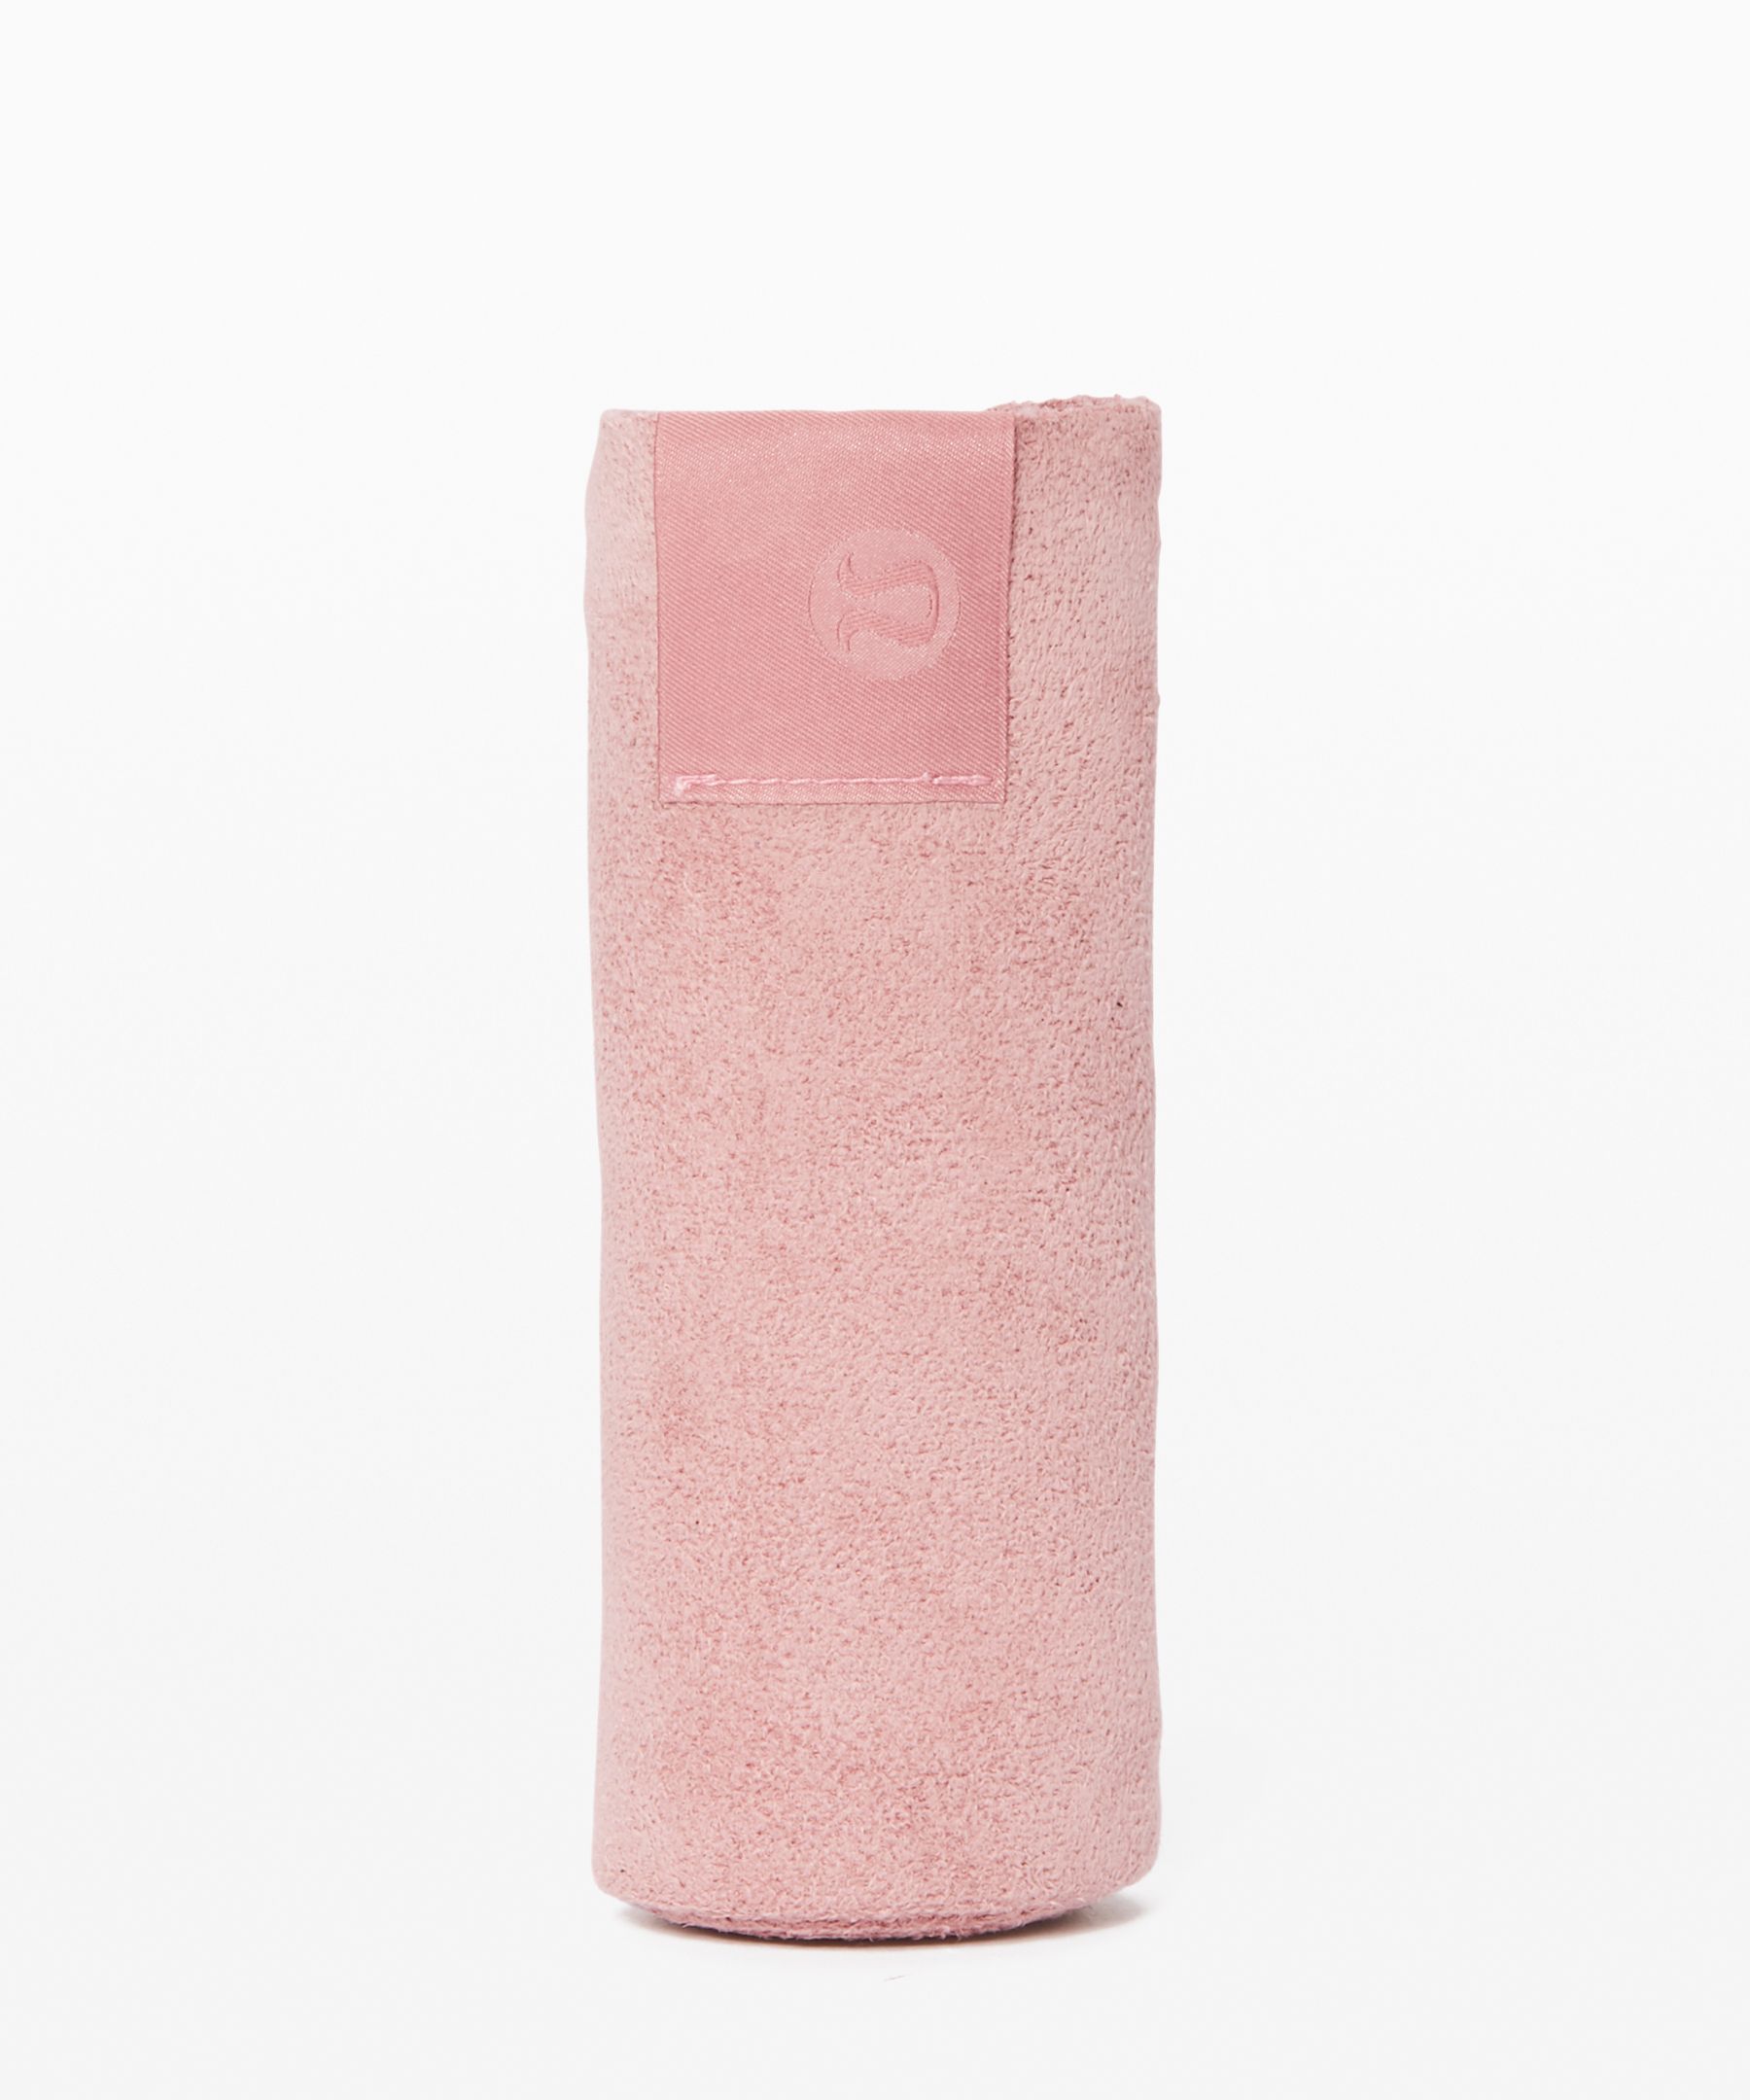 Lululemon The (small) Towel In Light Quicksand